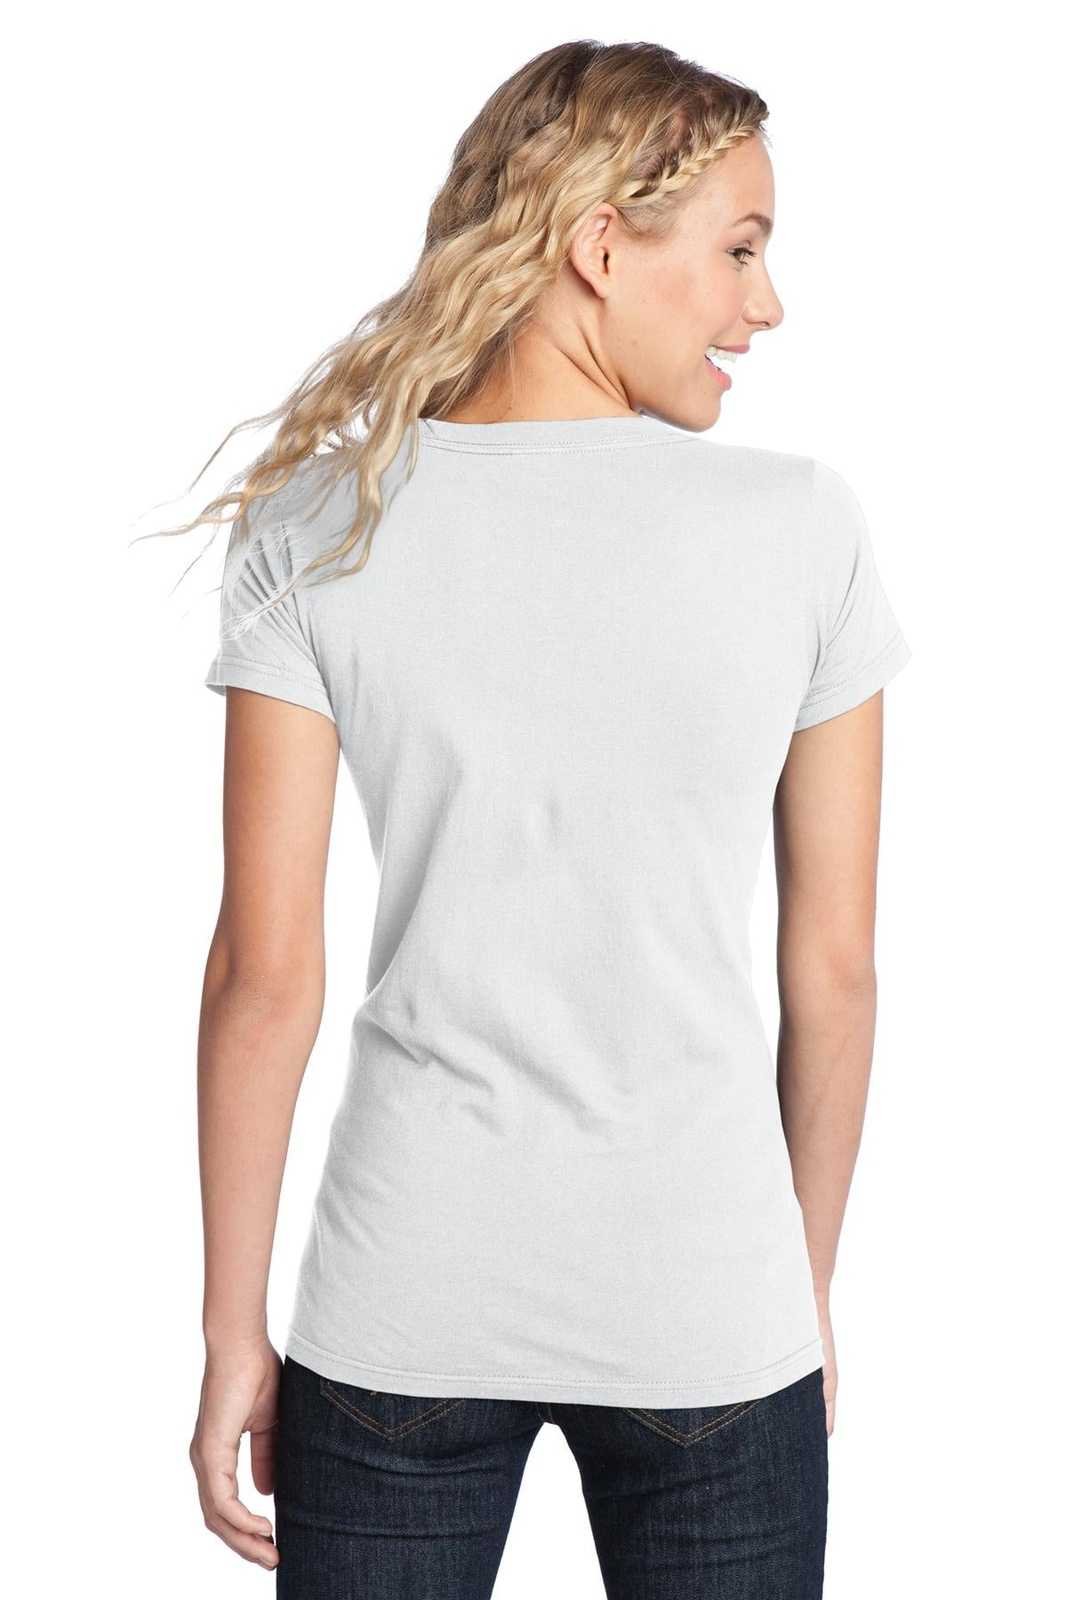 District DT5001 Women's Fitted The Concert Tee - White - HIT a Double - 1